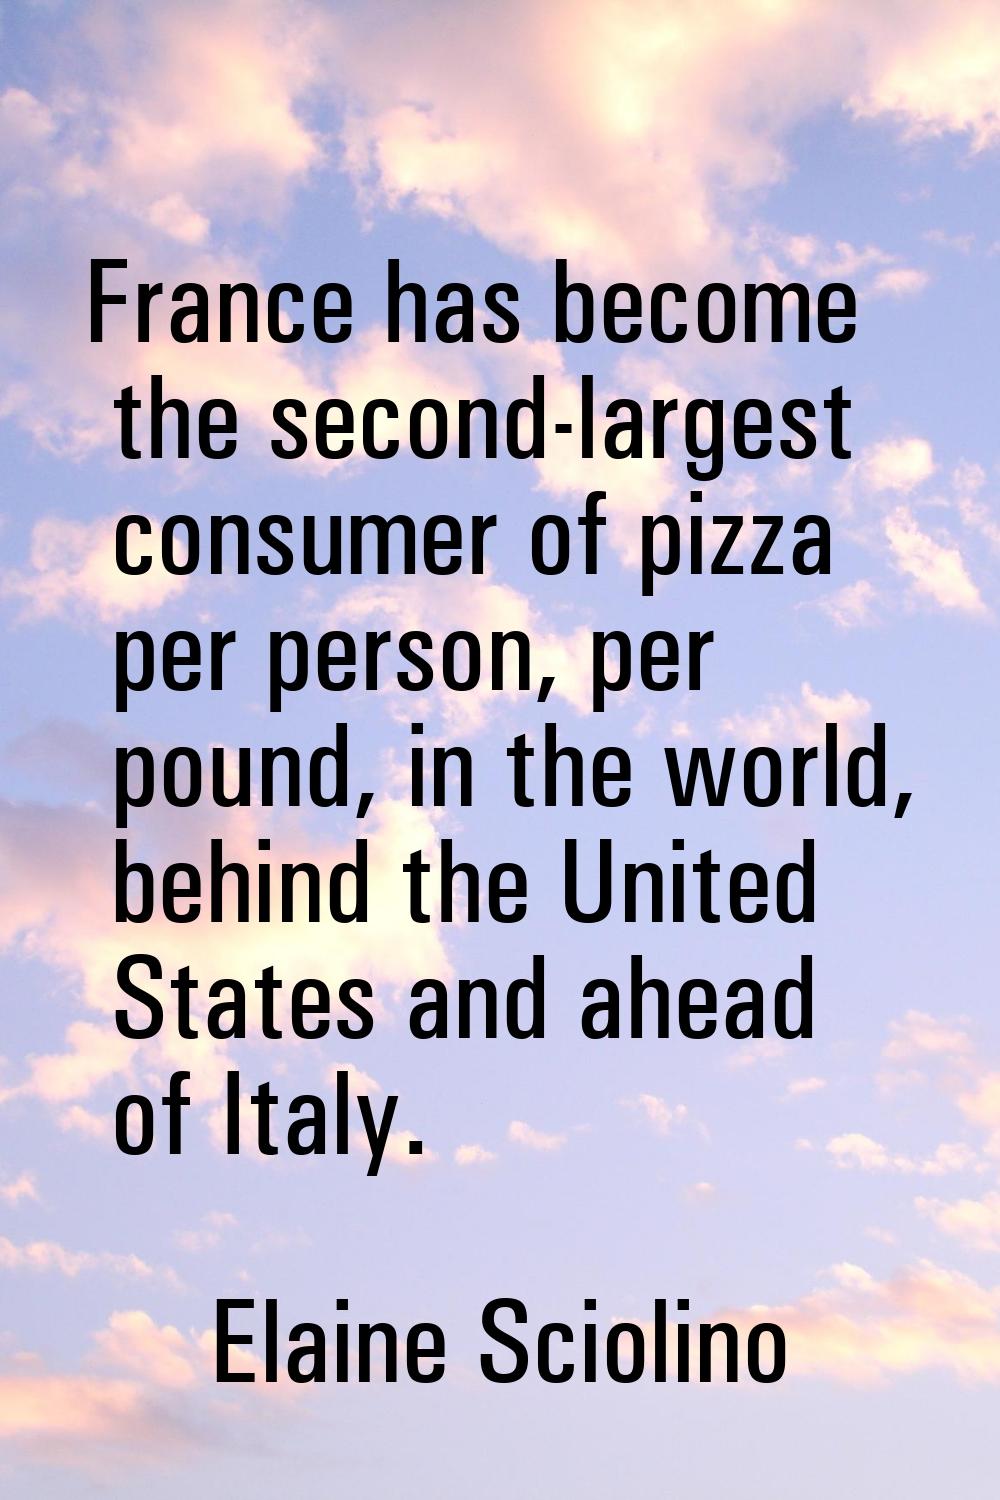 France has become the second-largest consumer of pizza per person, per pound, in the world, behind 